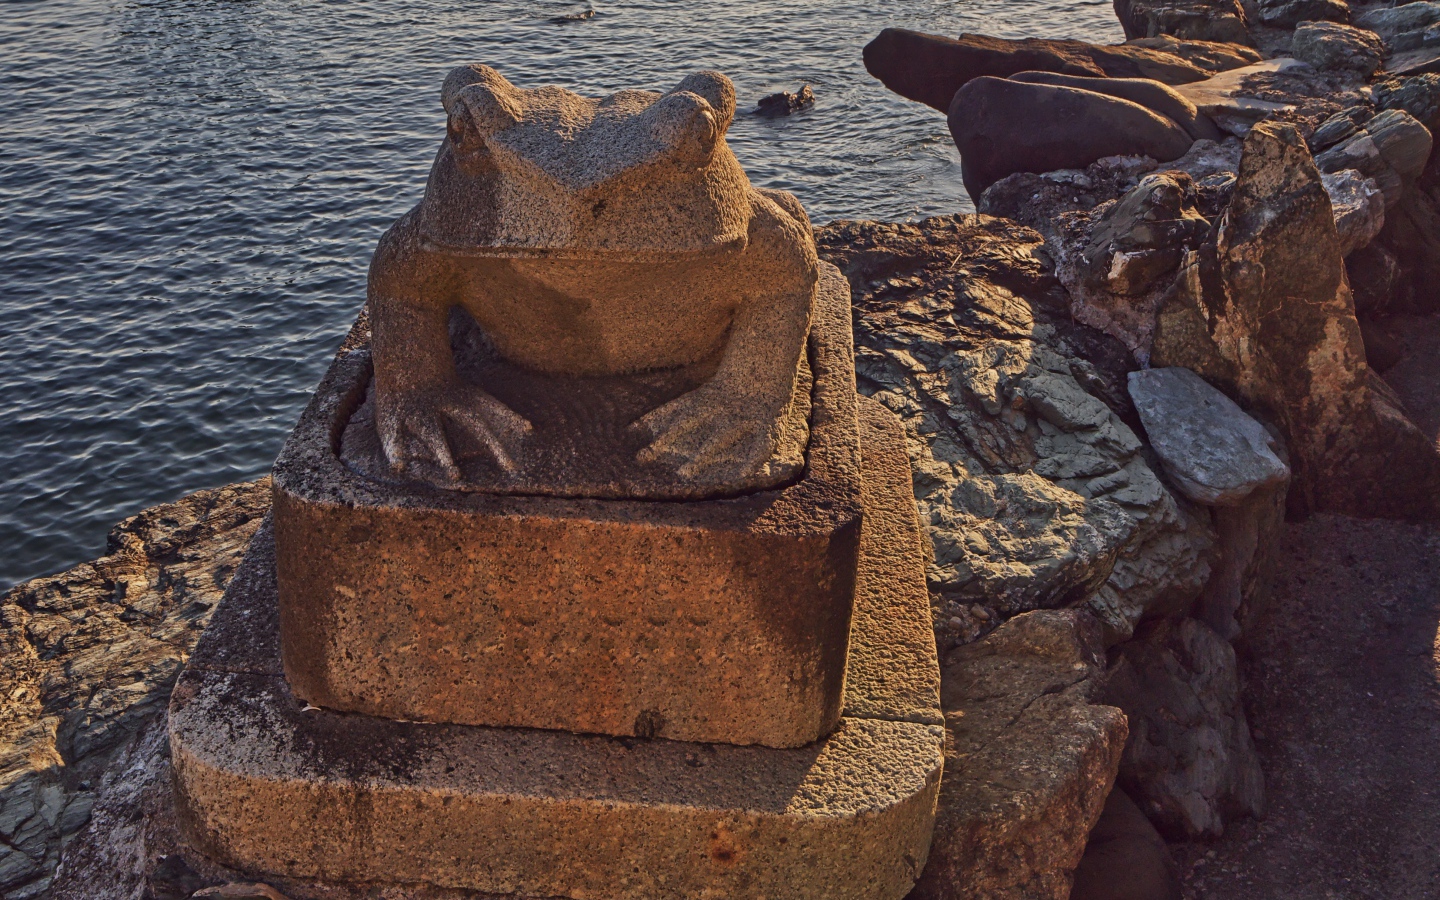 Stone Toad on the beach